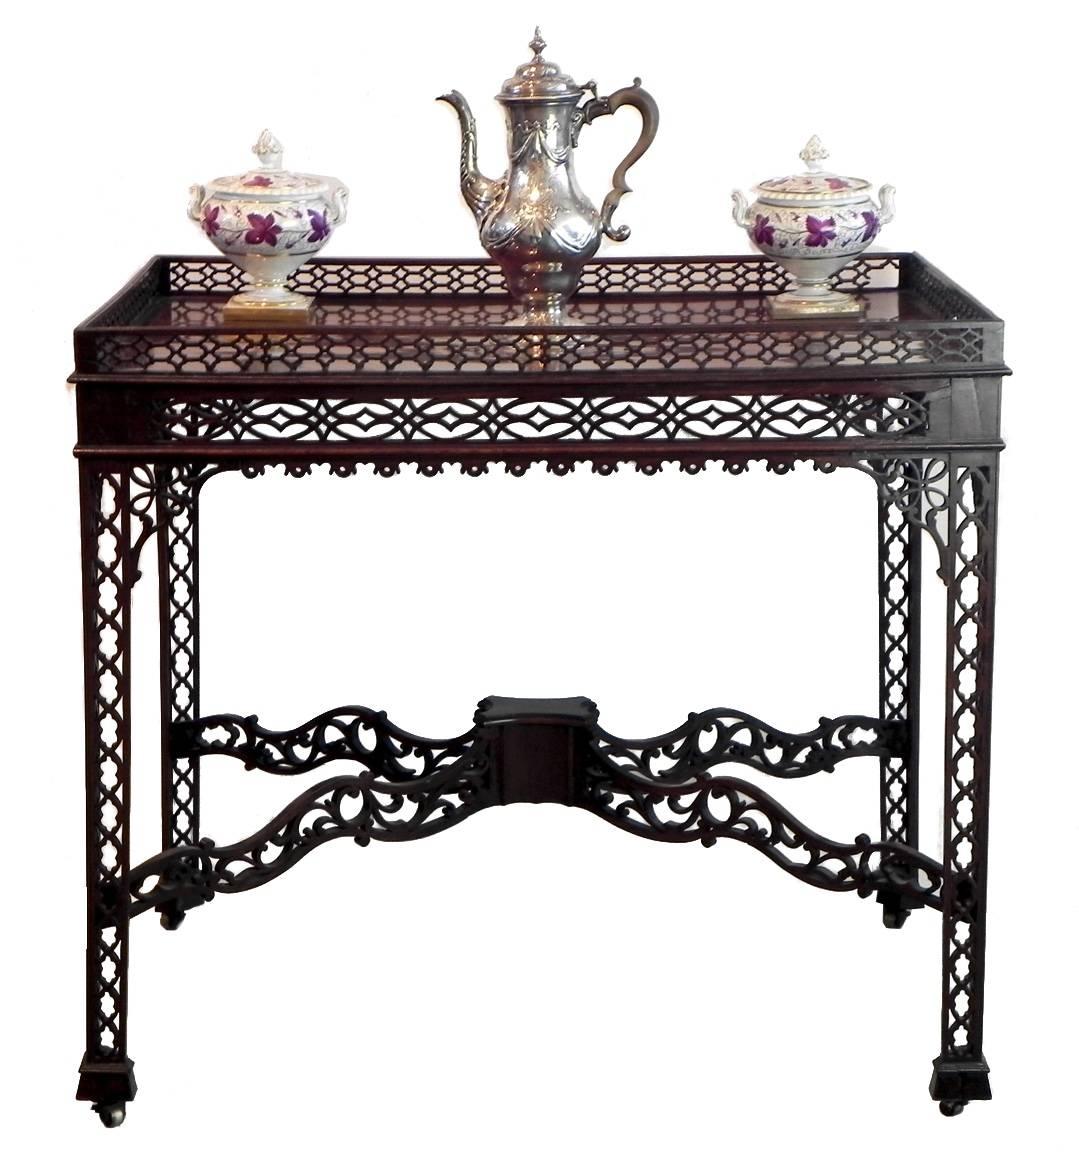 This exquisite Mahogany George III Chinese Chippendale Tea Table was the equivalent of a modern day coffee table. 
The delicate fretwork throughout is all original and the top is made of one piece of Flame Mahogany. The table stands on it's original